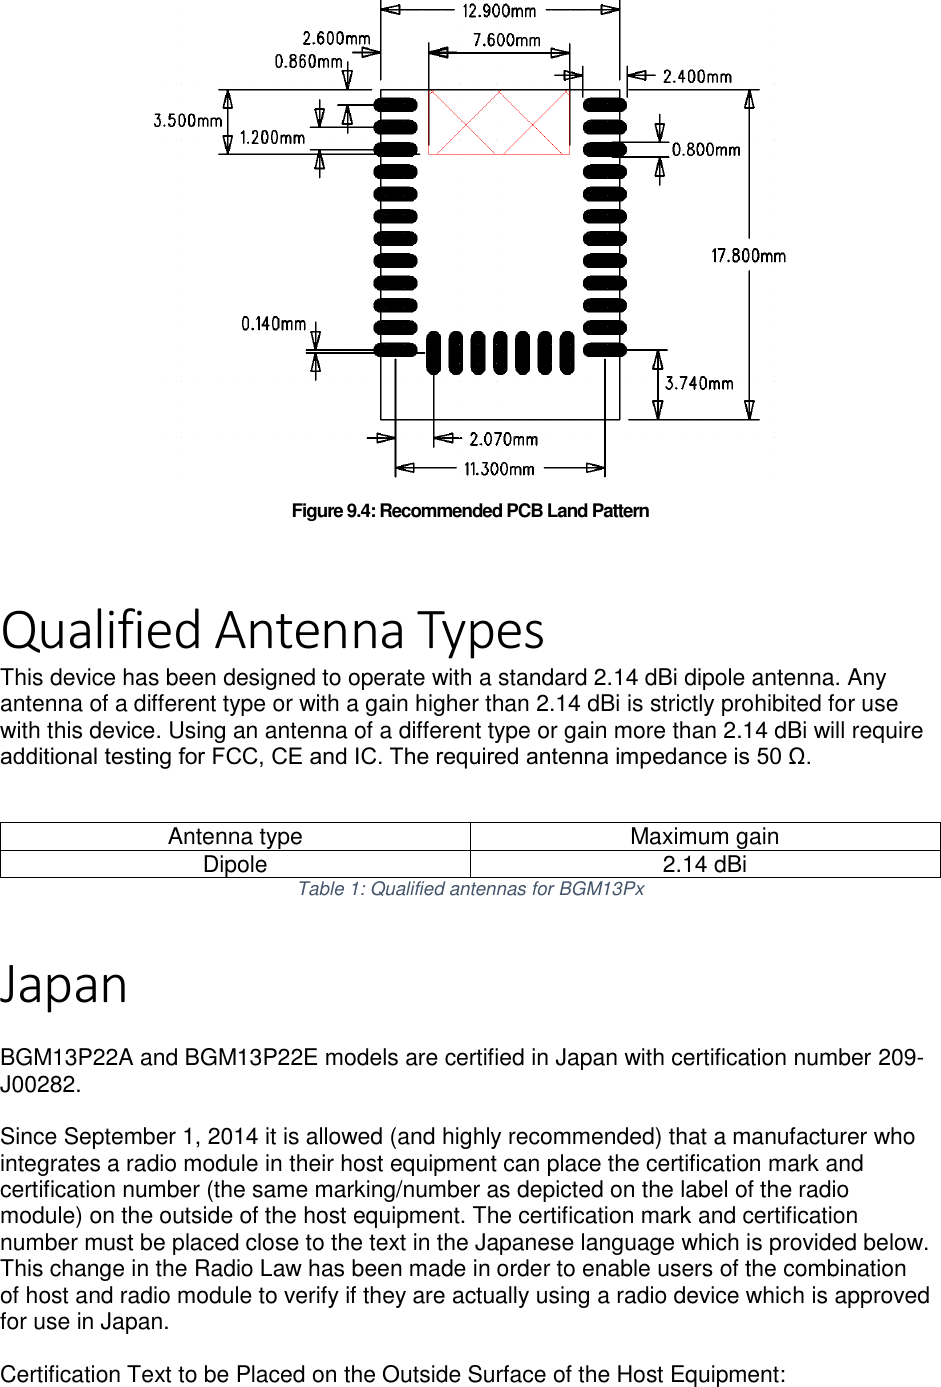 Page 2 of 7    Figure 9.4: Recommended PCB Land Pattern  Qualified Antenna Types This device has been designed to operate with a standard 2.14 dBi dipole antenna. Any antenna of a different type or with a gain higher than 2.14 dBi is strictly prohibited for use with this device. Using an antenna of a different type or gain more than 2.14 dBi will require additional testing for FCC, CE and IC. The required antenna impedance is 50 Ω.   Antenna type Maximum gain Dipole 2.14 dBi Table 1: Qualified antennas for BGM13Px  Japan  BGM13P22A and BGM13P22E models are certified in Japan with certification number 209-J00282.  Since September 1, 2014 it is allowed (and highly recommended) that a manufacturer who integrates a radio module in their host equipment can place the certification mark and certification number (the same marking/number as depicted on the label of the radio module) on the outside of the host equipment. The certification mark and certification number must be placed close to the text in the Japanese language which is provided below. This change in the Radio Law has been made in order to enable users of the combination of host and radio module to verify if they are actually using a radio device which is approved for use in Japan.  Certification Text to be Placed on the Outside Surface of the Host Equipment:  